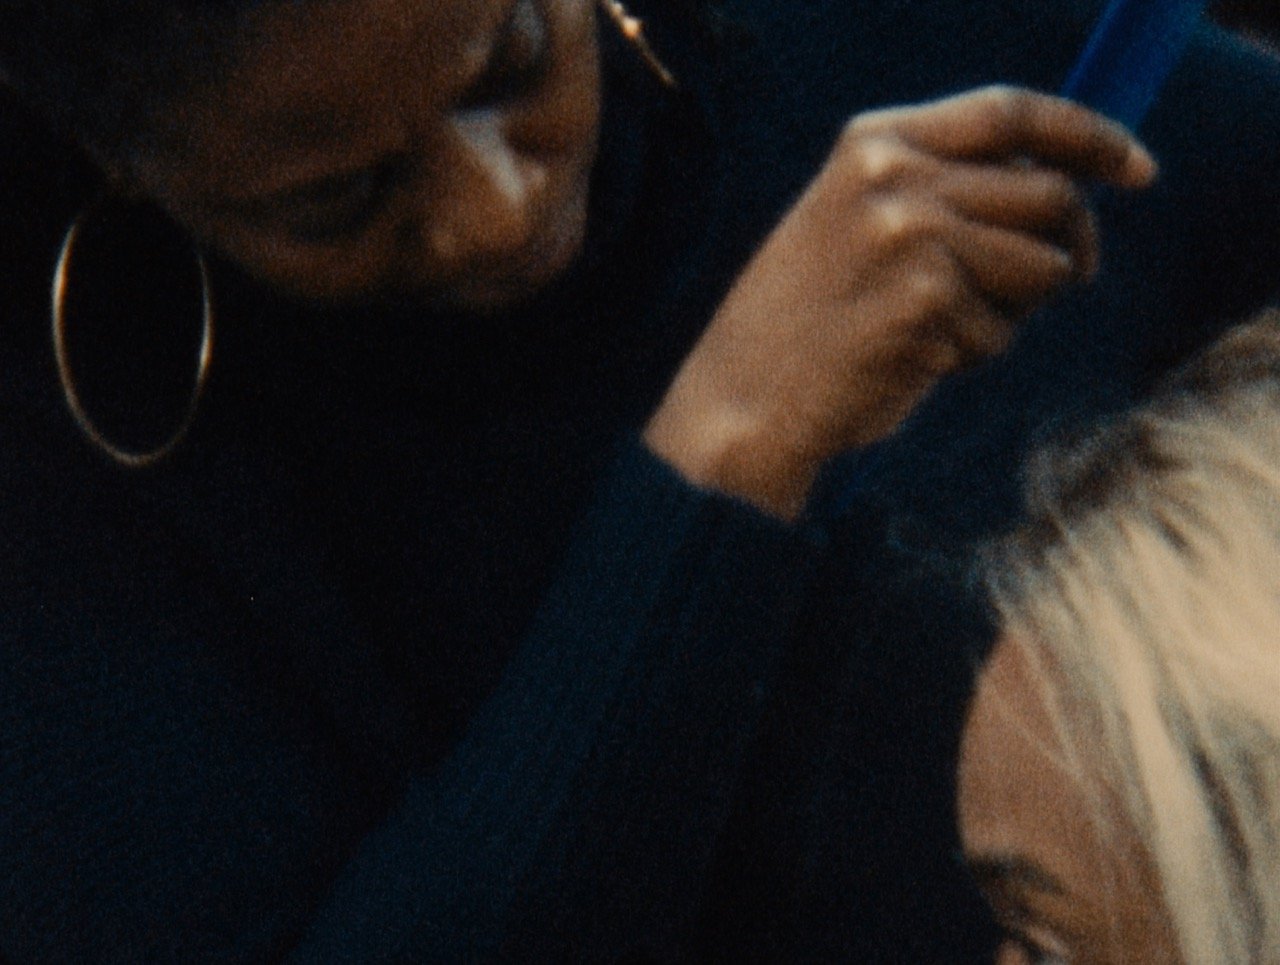 A close look at a black person with large hoop earrings in a navy turtleneck looking closely at another person and gesturing to comb their grey hair that is barely visible in the frame